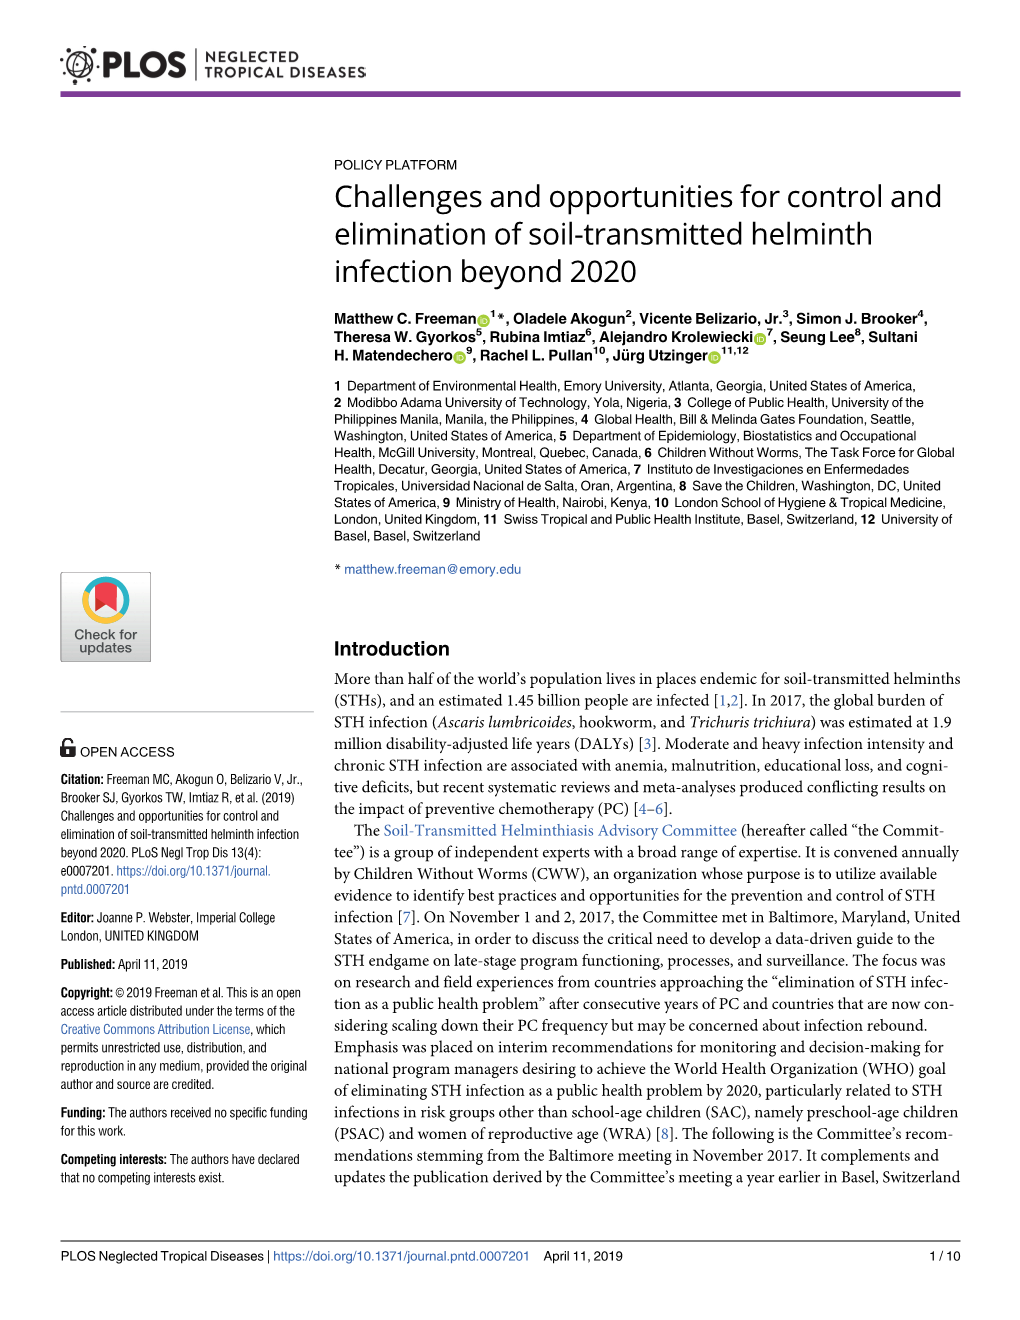 Challenges and Opportunities for Control and Elimination of Soil-Transmitted Helminth Infection Beyond 2020